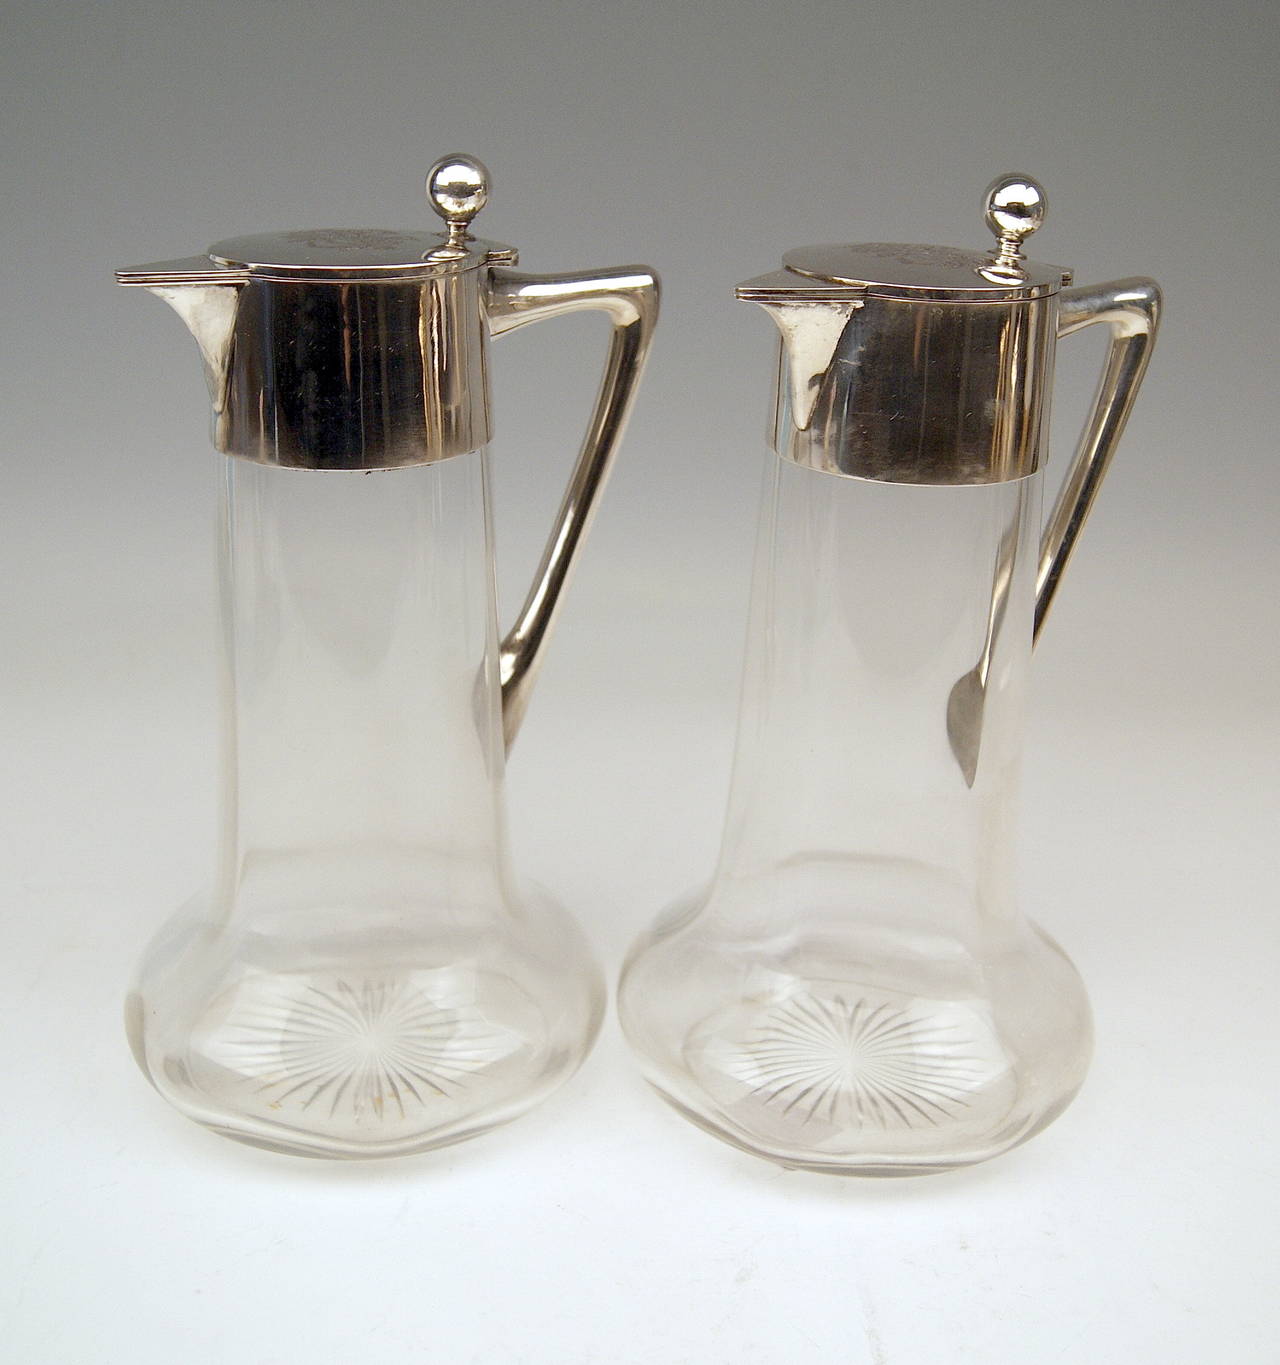 Silver German Pair of Glass Decanters / Carafes with Silver Mounting 
Art Nouveau Period  /  made circa 1900 

These carafes / decanters are of most elegant appearance:
The hollow parts made of glass - they are of very slight tapering type -